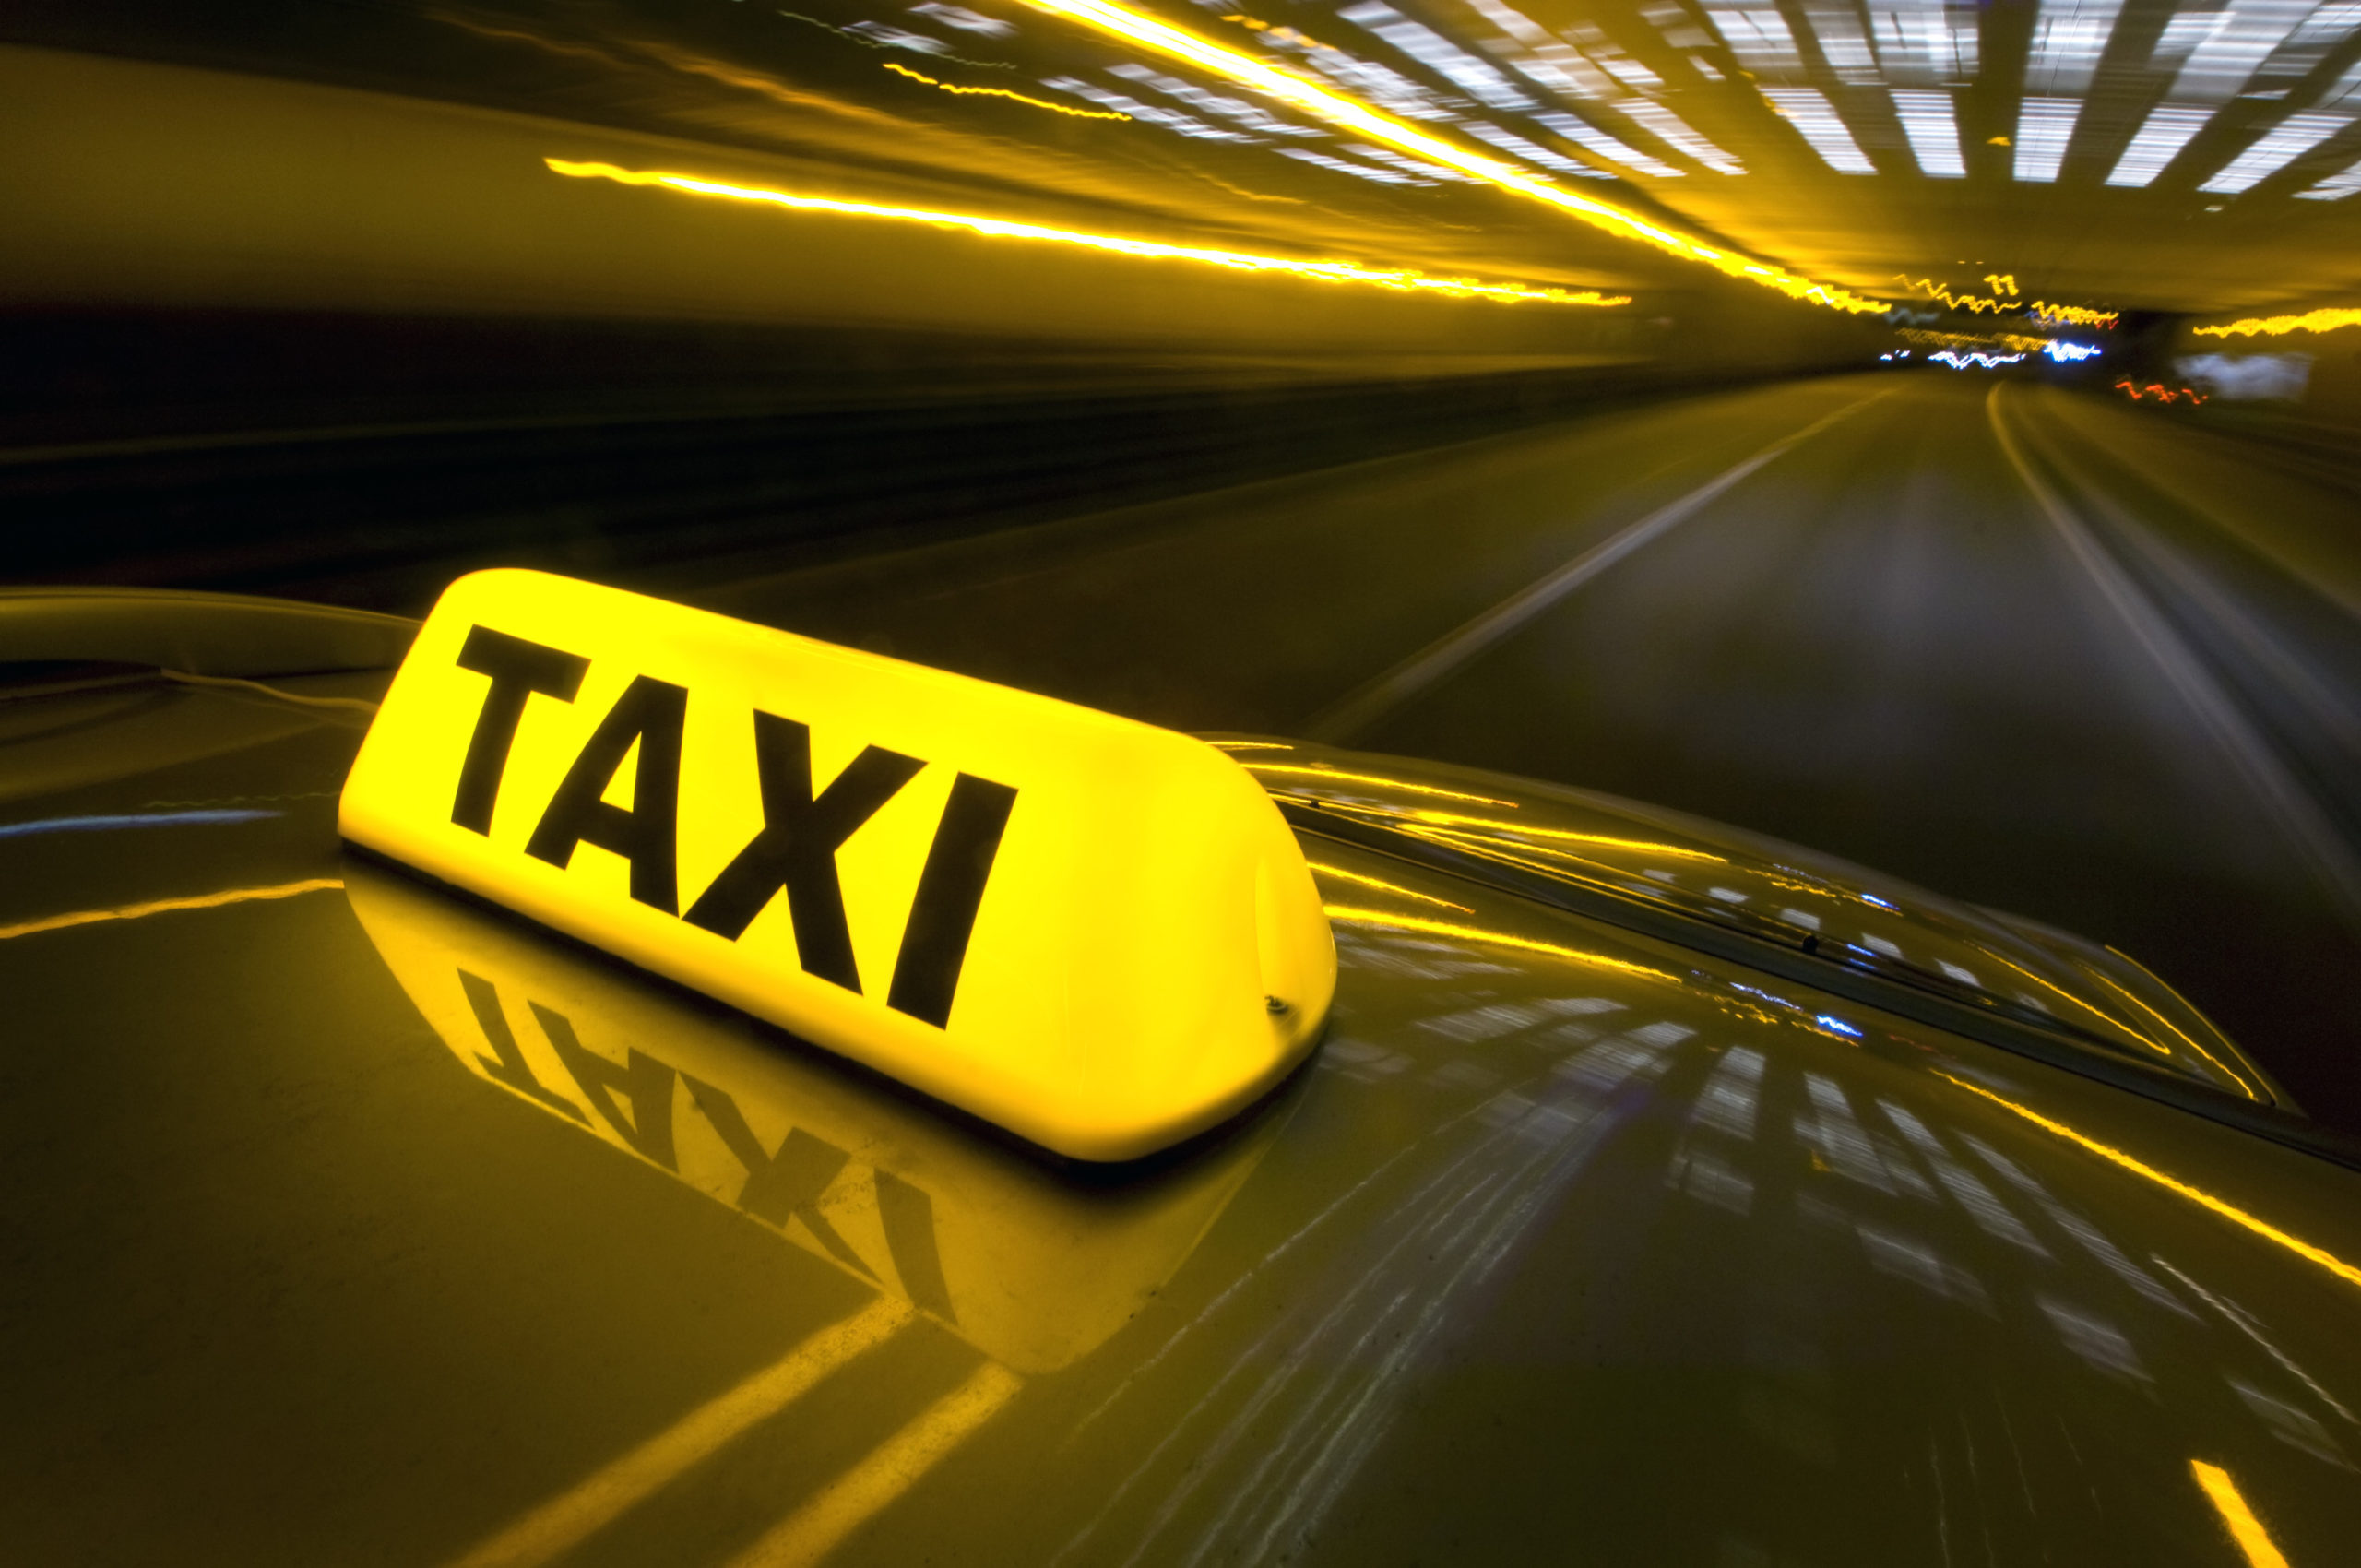 Taxi rate hike proposed in Stratford